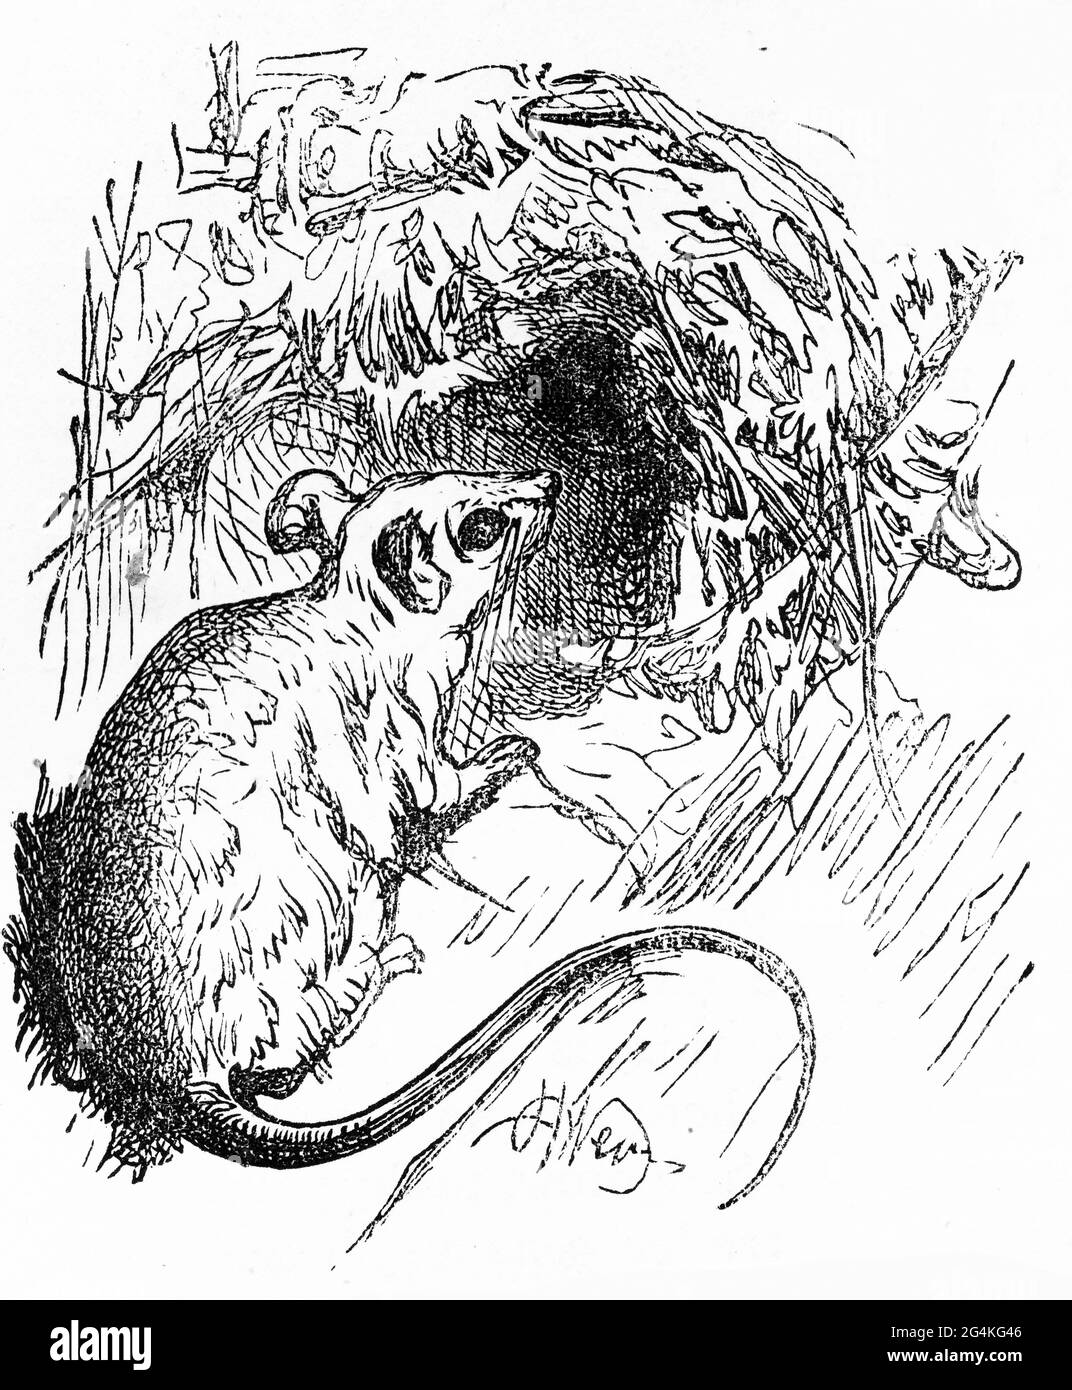 Engraving of a rat sneaking into its hole Stock Photo